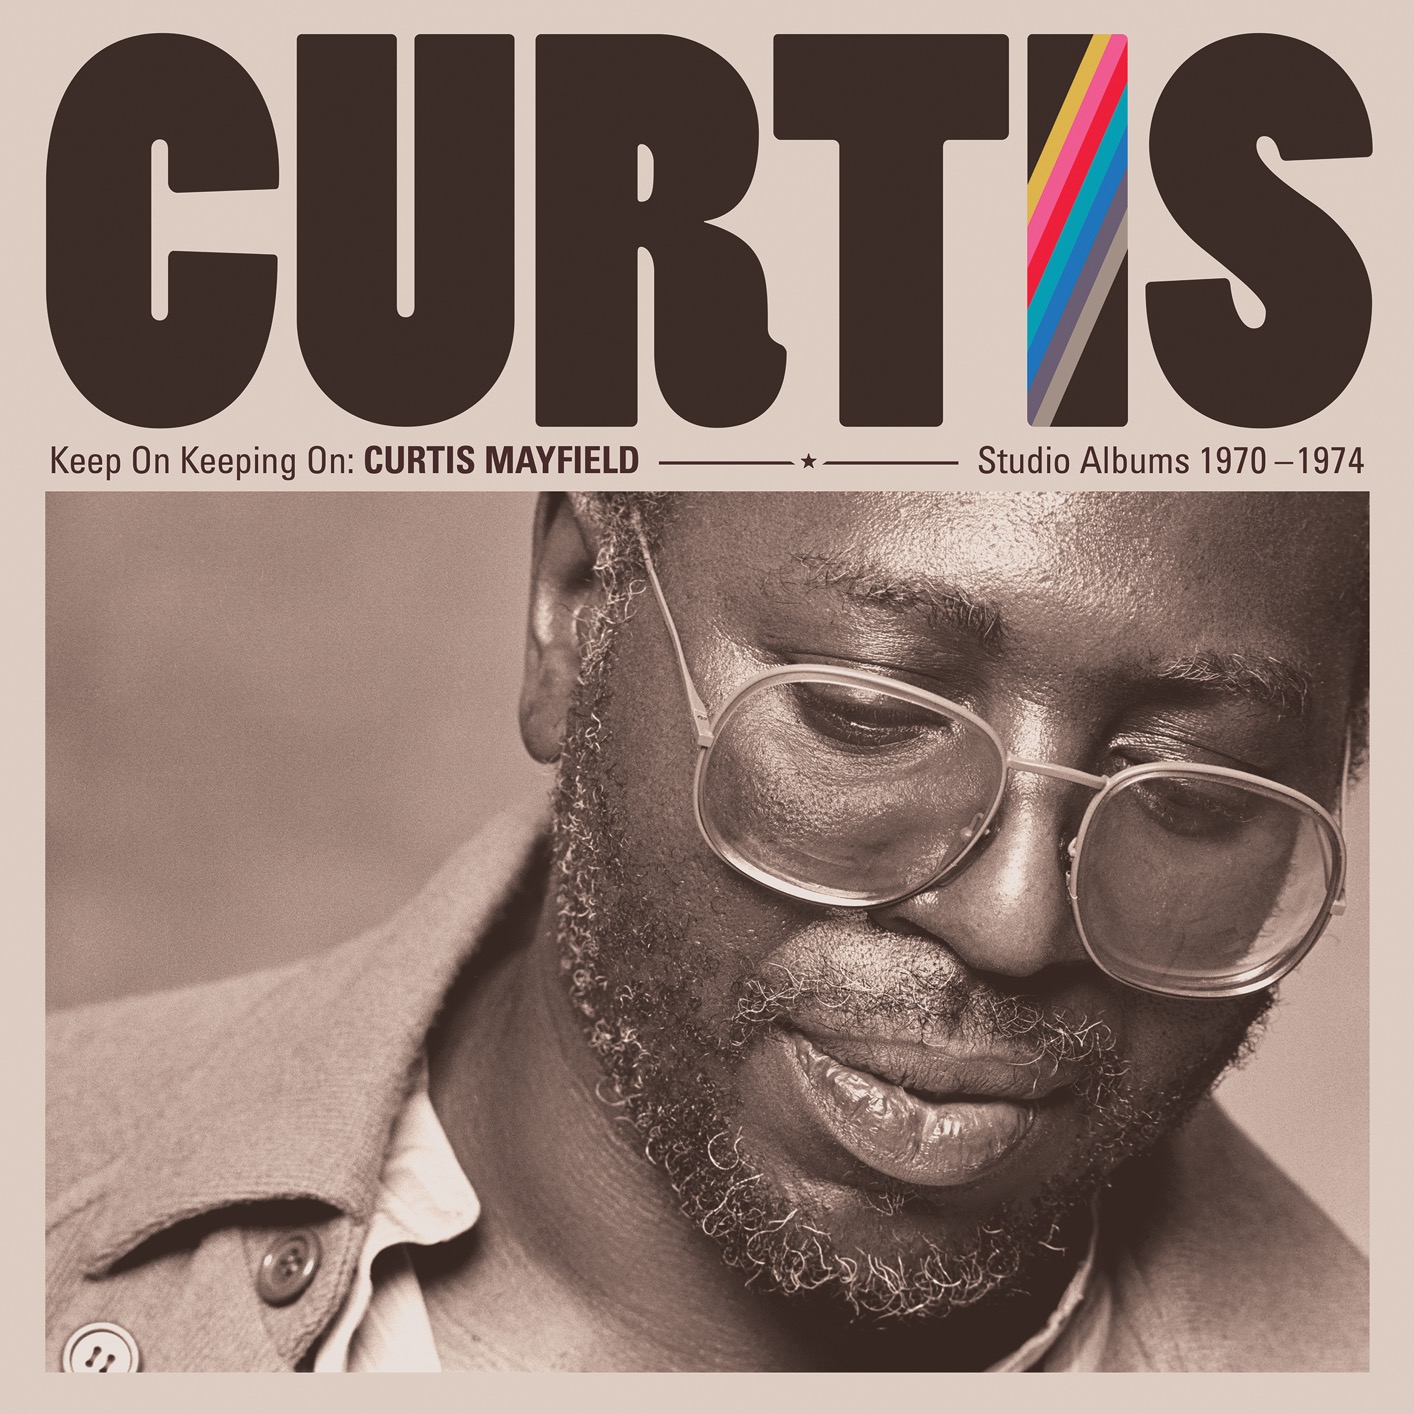 Curtis Mayfield – Keep On Keeping On: Curtis Mayfield Studio Albums 1970-1974 (Remastered) (2019) [FLAC 24bit/96kHz]